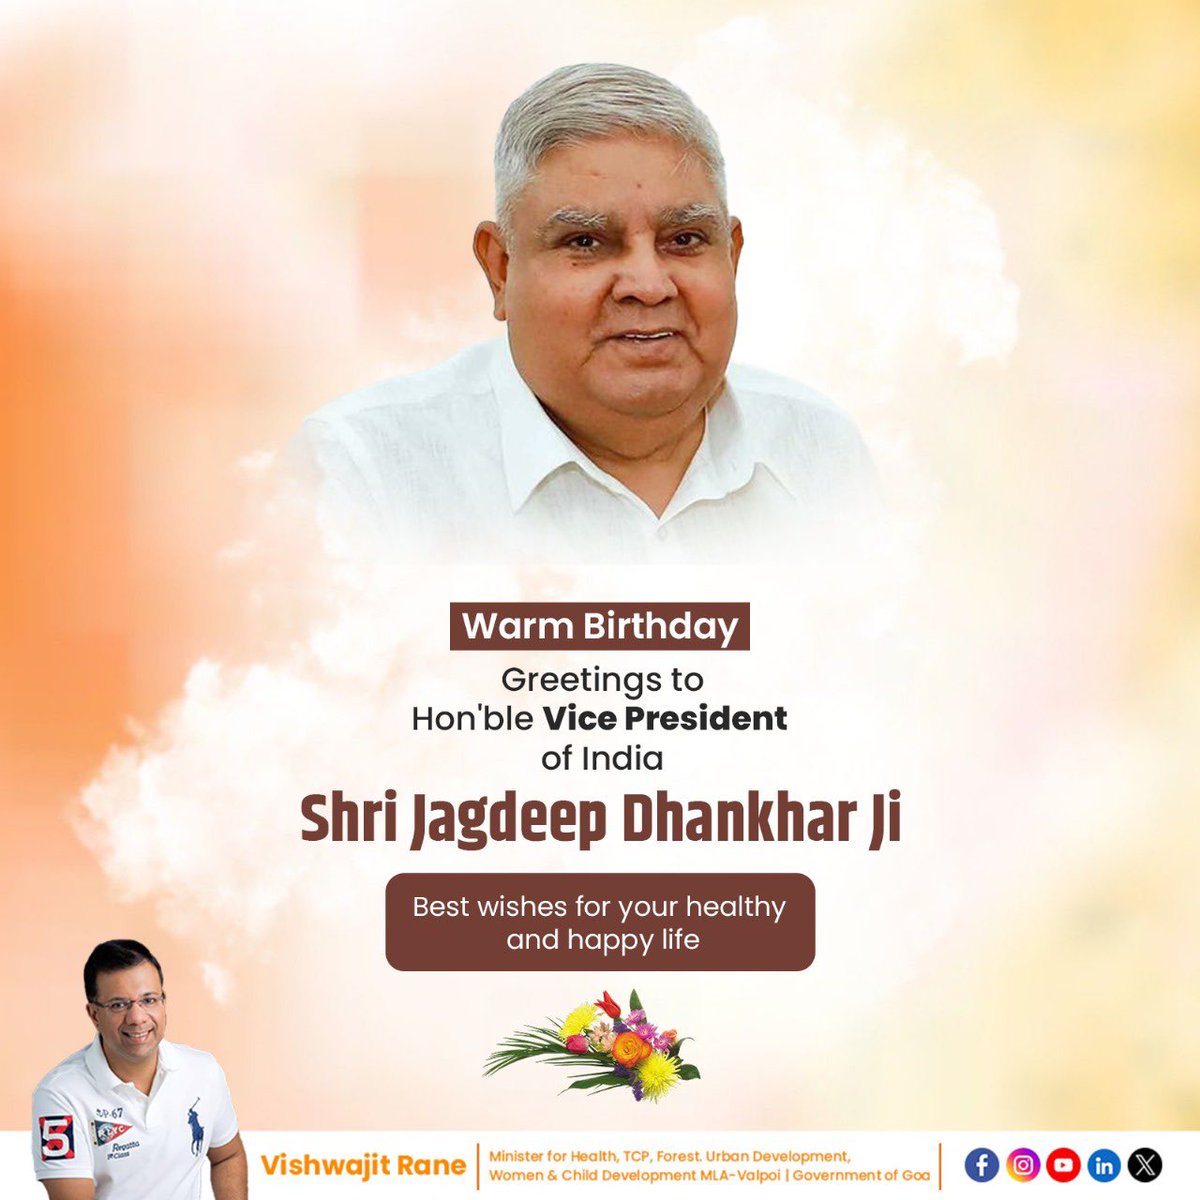 My heartiest birthday greetings to Hon'ble Vice President of India Shri Jagdeep Dhankhar Ji! May God bless him with happy, healthy and long life!